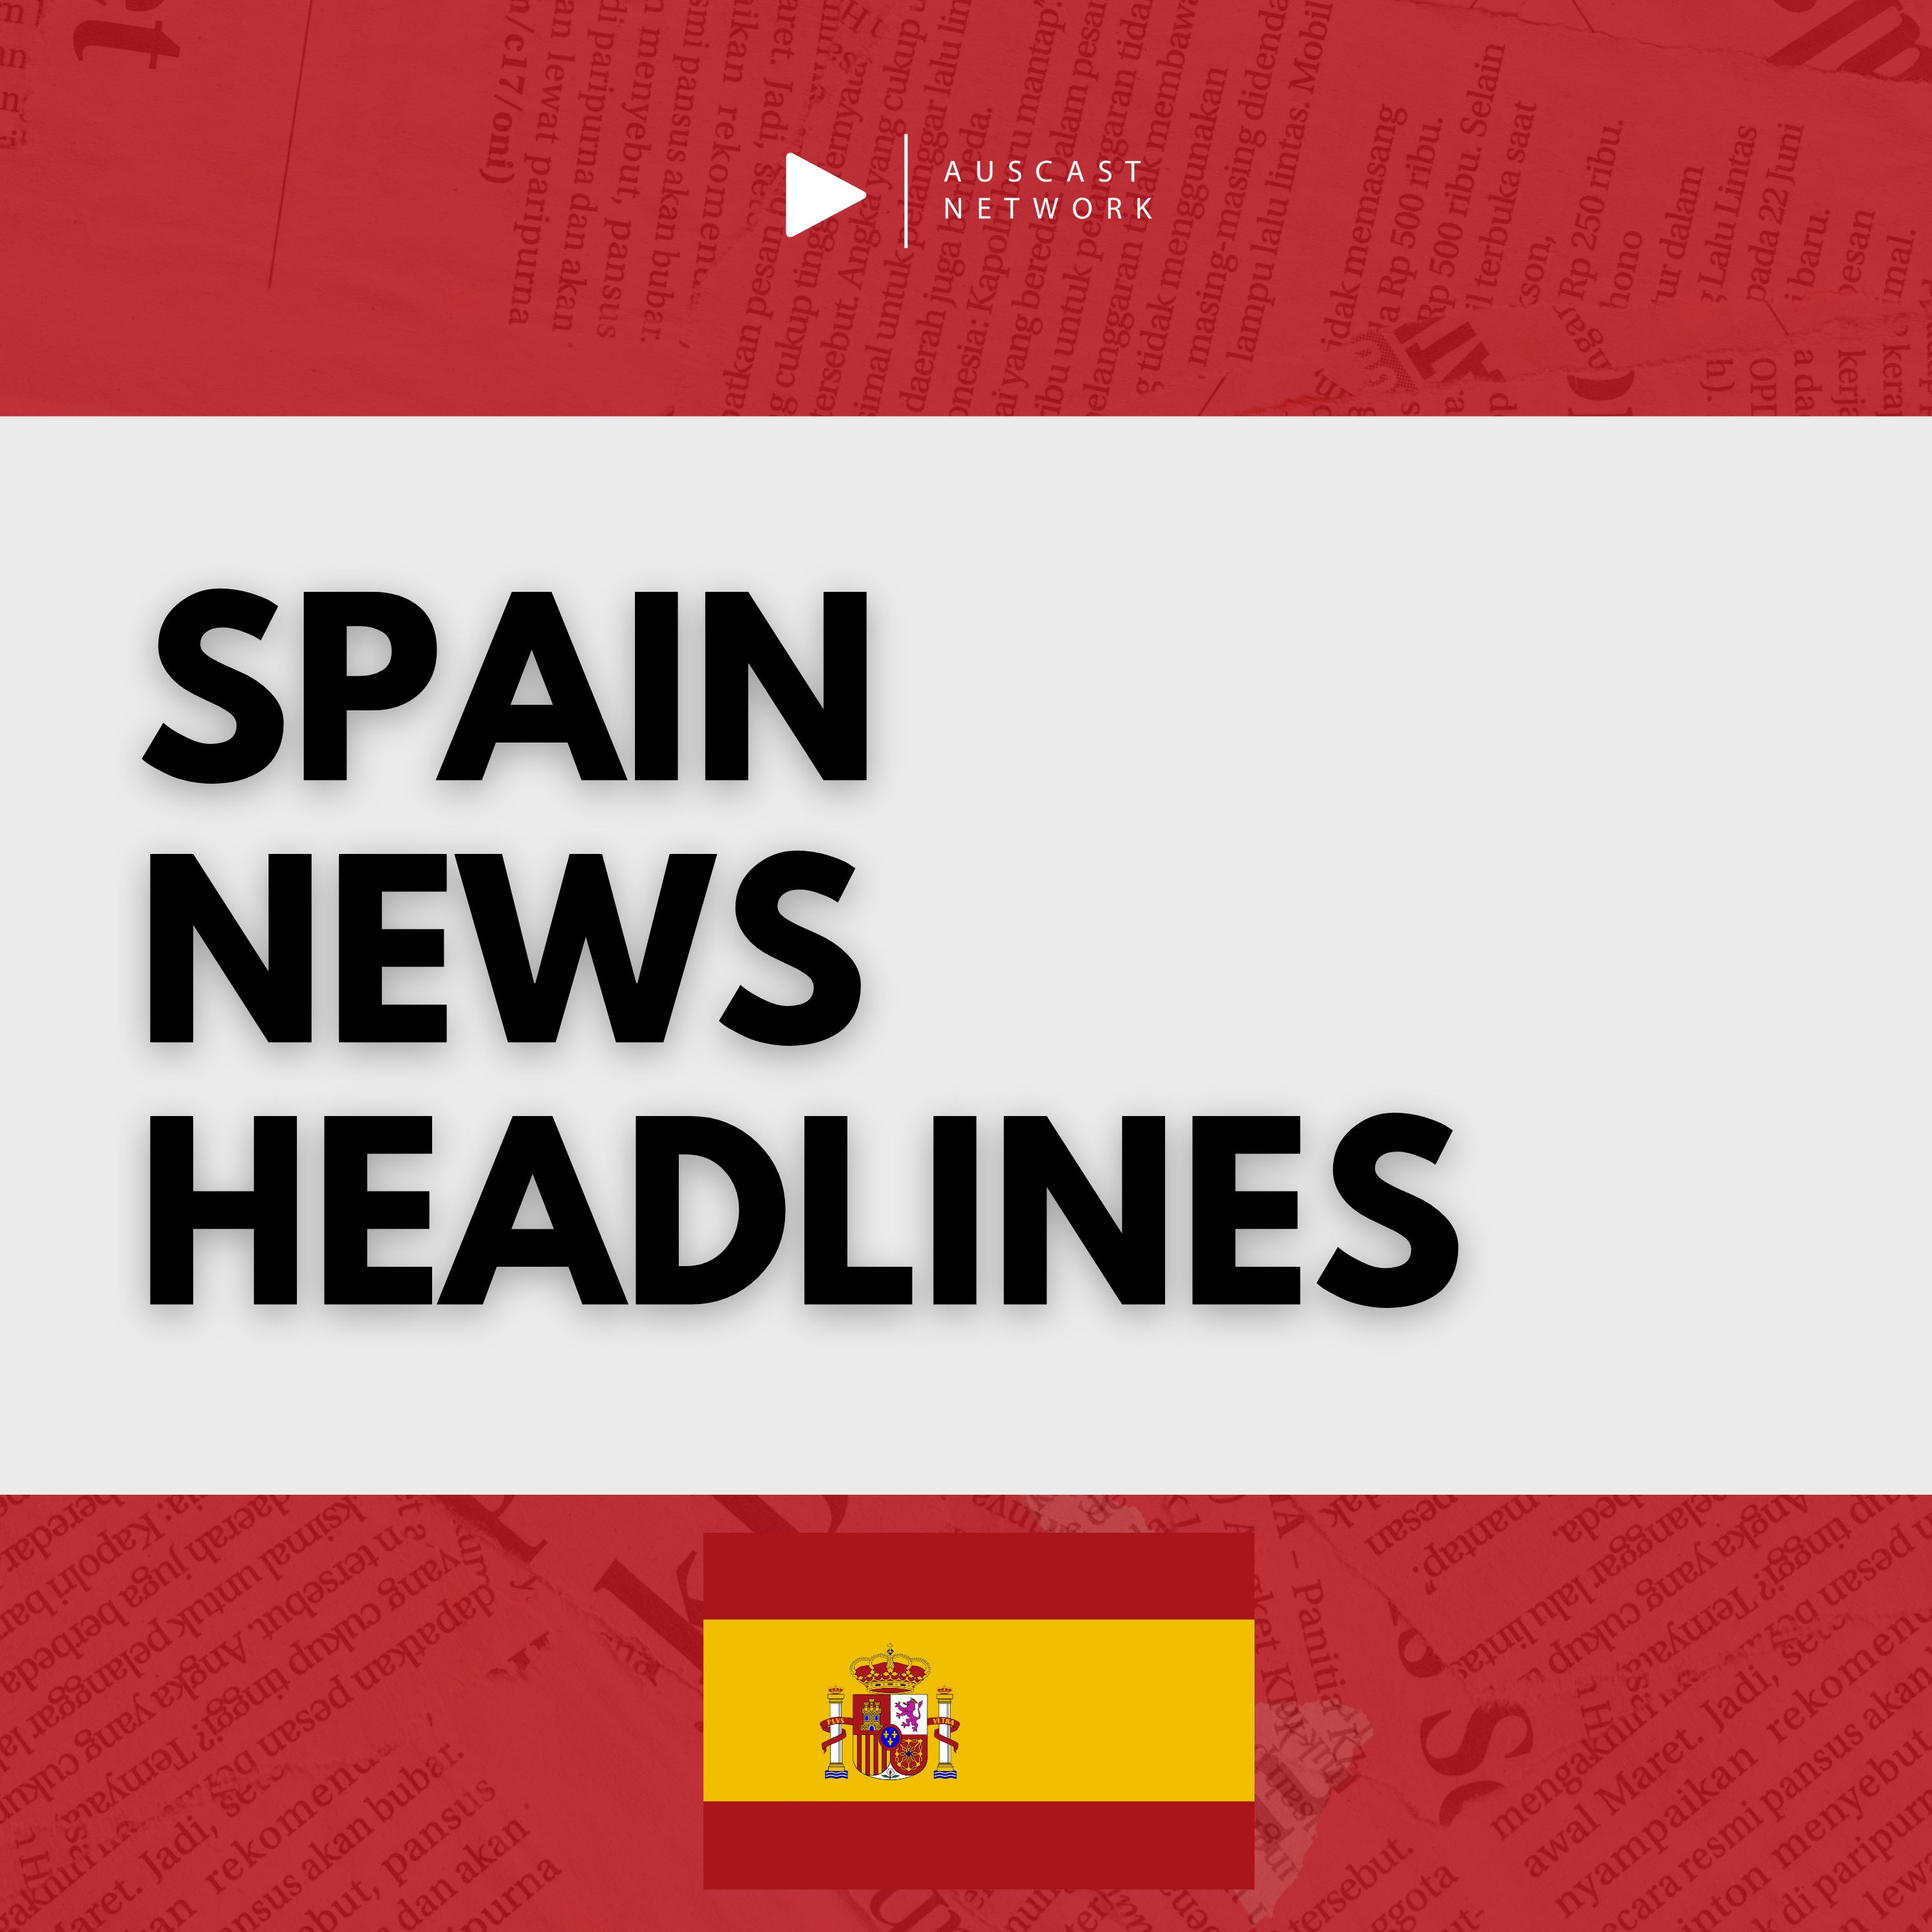 Monday Apr 10, 2023 - Spain - Wife falls from balcony in Benidorm, Jon Rahm wins 87th Masters at Augusta National, Drug users in Spain 3,000 years ago